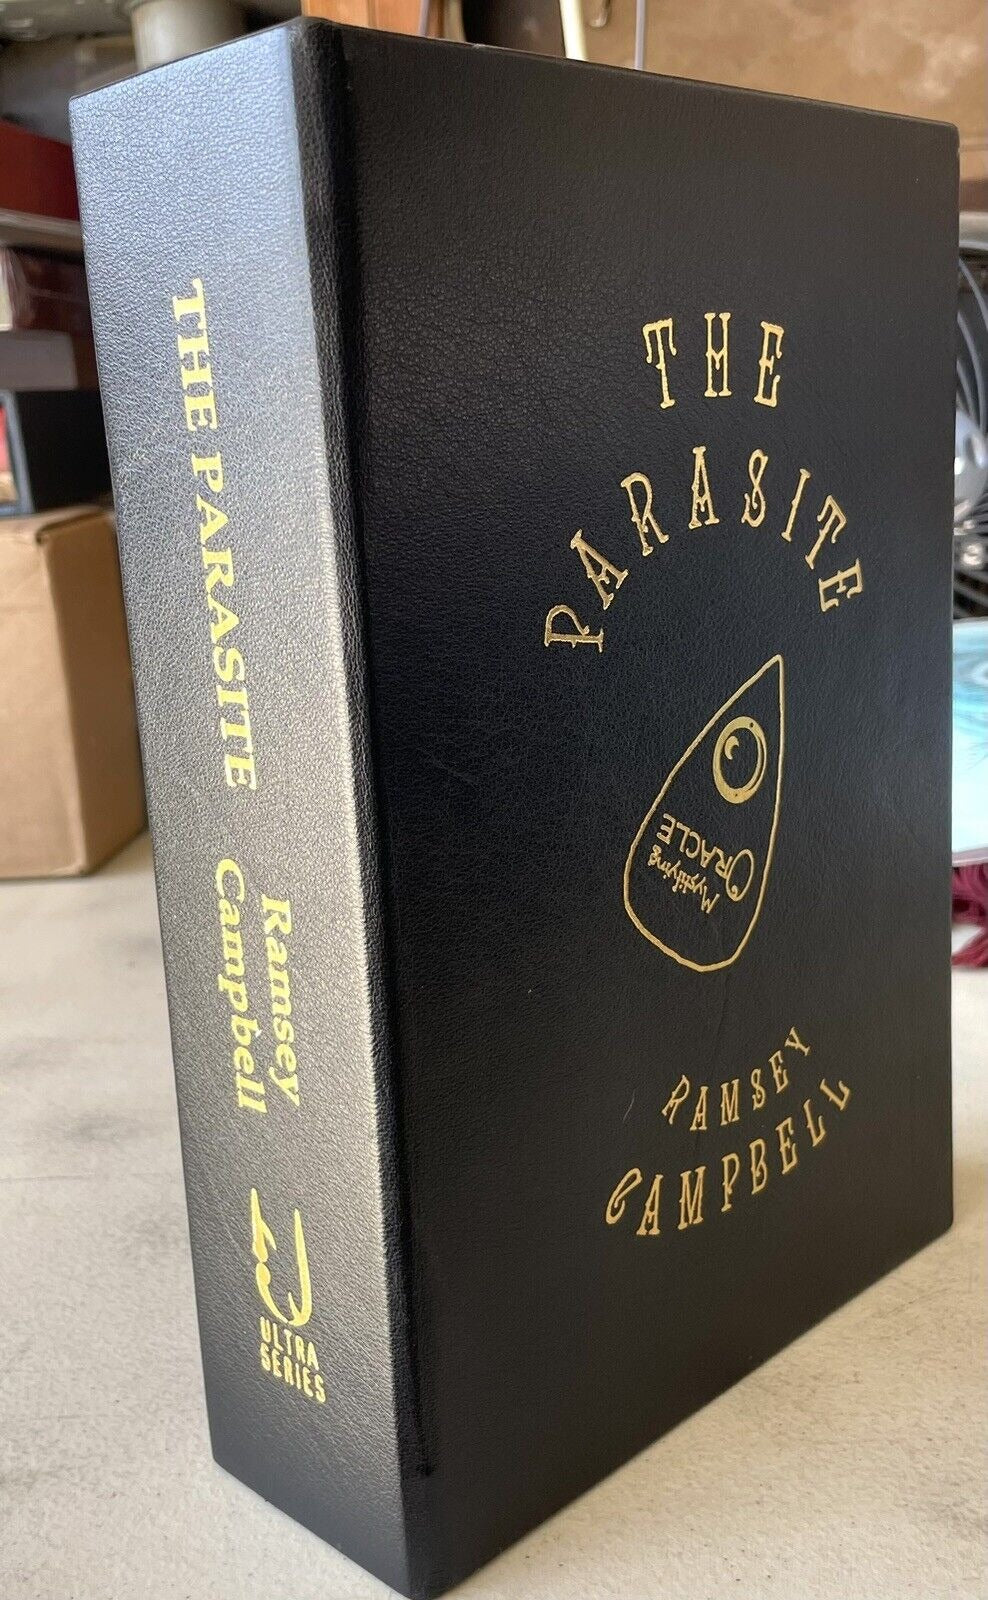 The Parasite by Ramsey Campbell Ultra-Deluxe Signed Numbered Traycased Hardcover